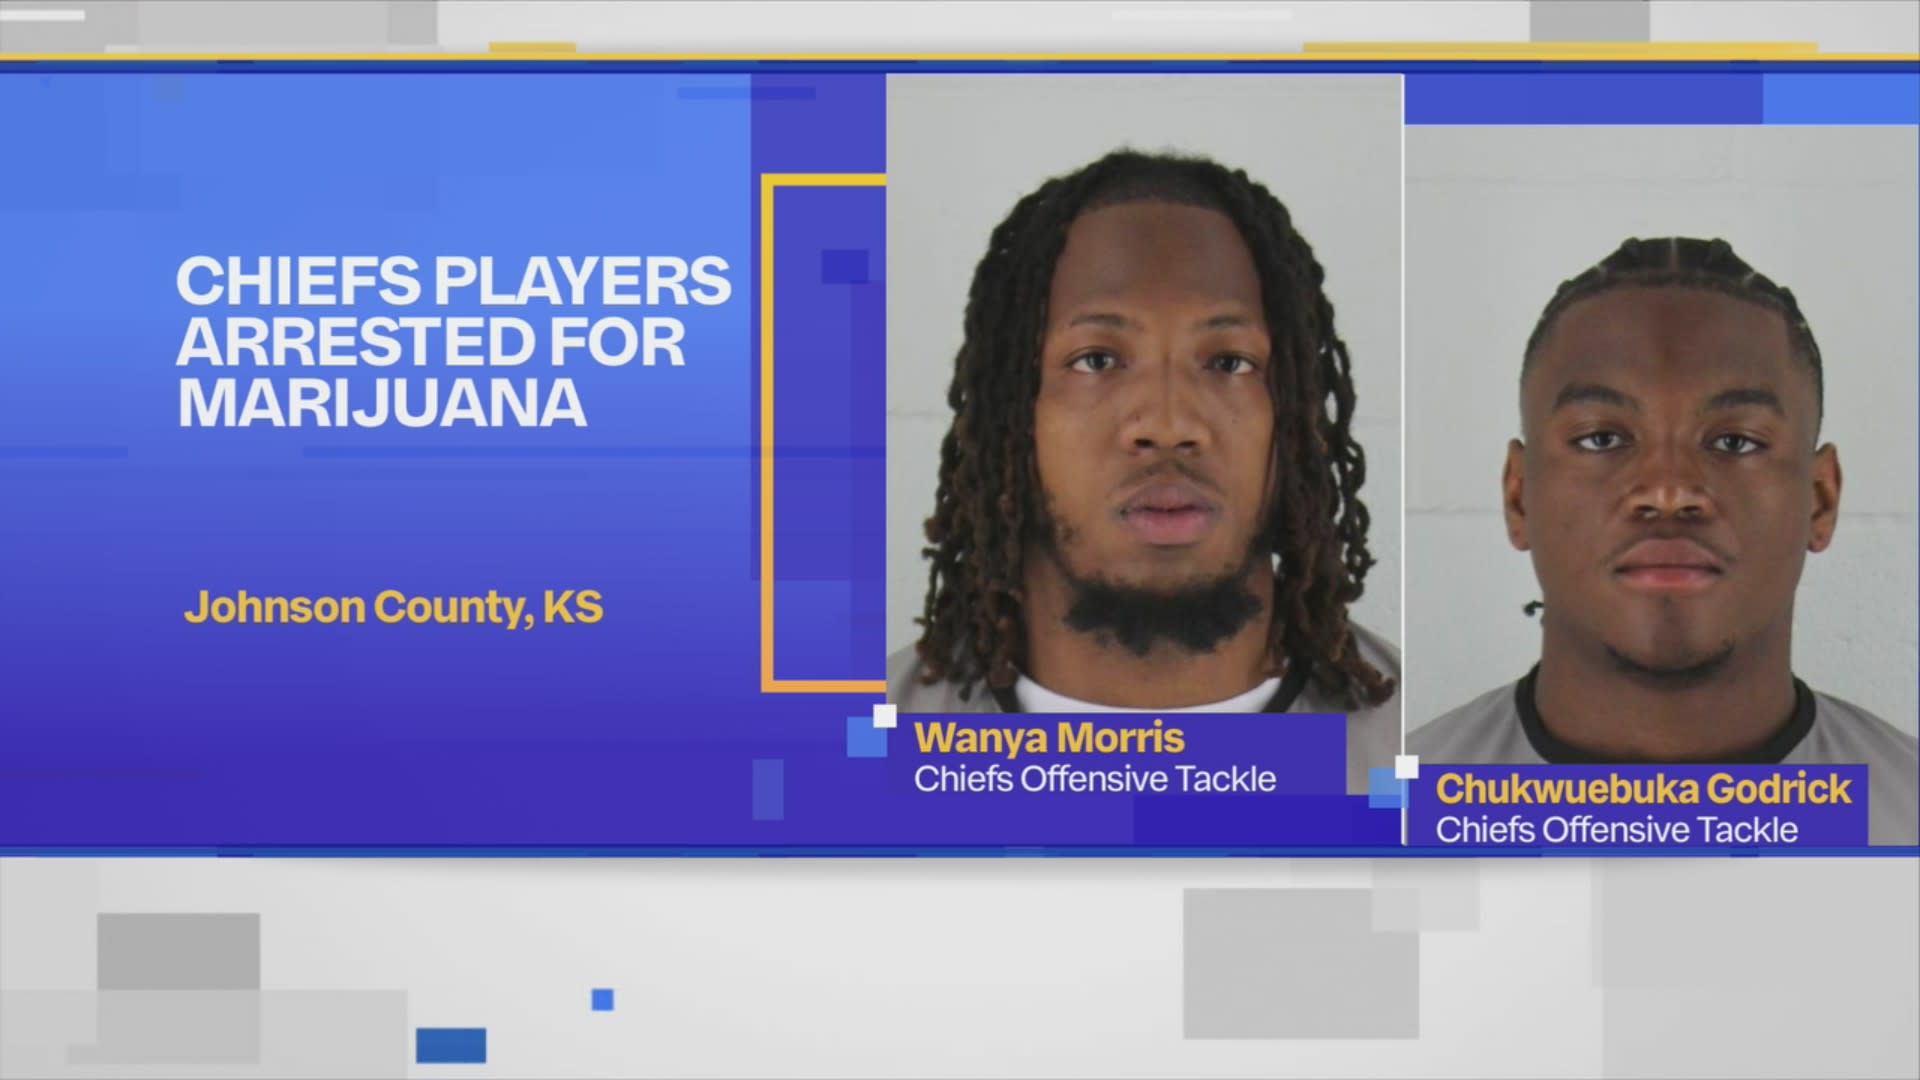 BREAKING: Chiefs' offensive linemen Wanya Morris and Chukwuebuka Godrick arrested in drug bust: Legal troubles loom as players post bond and await court date